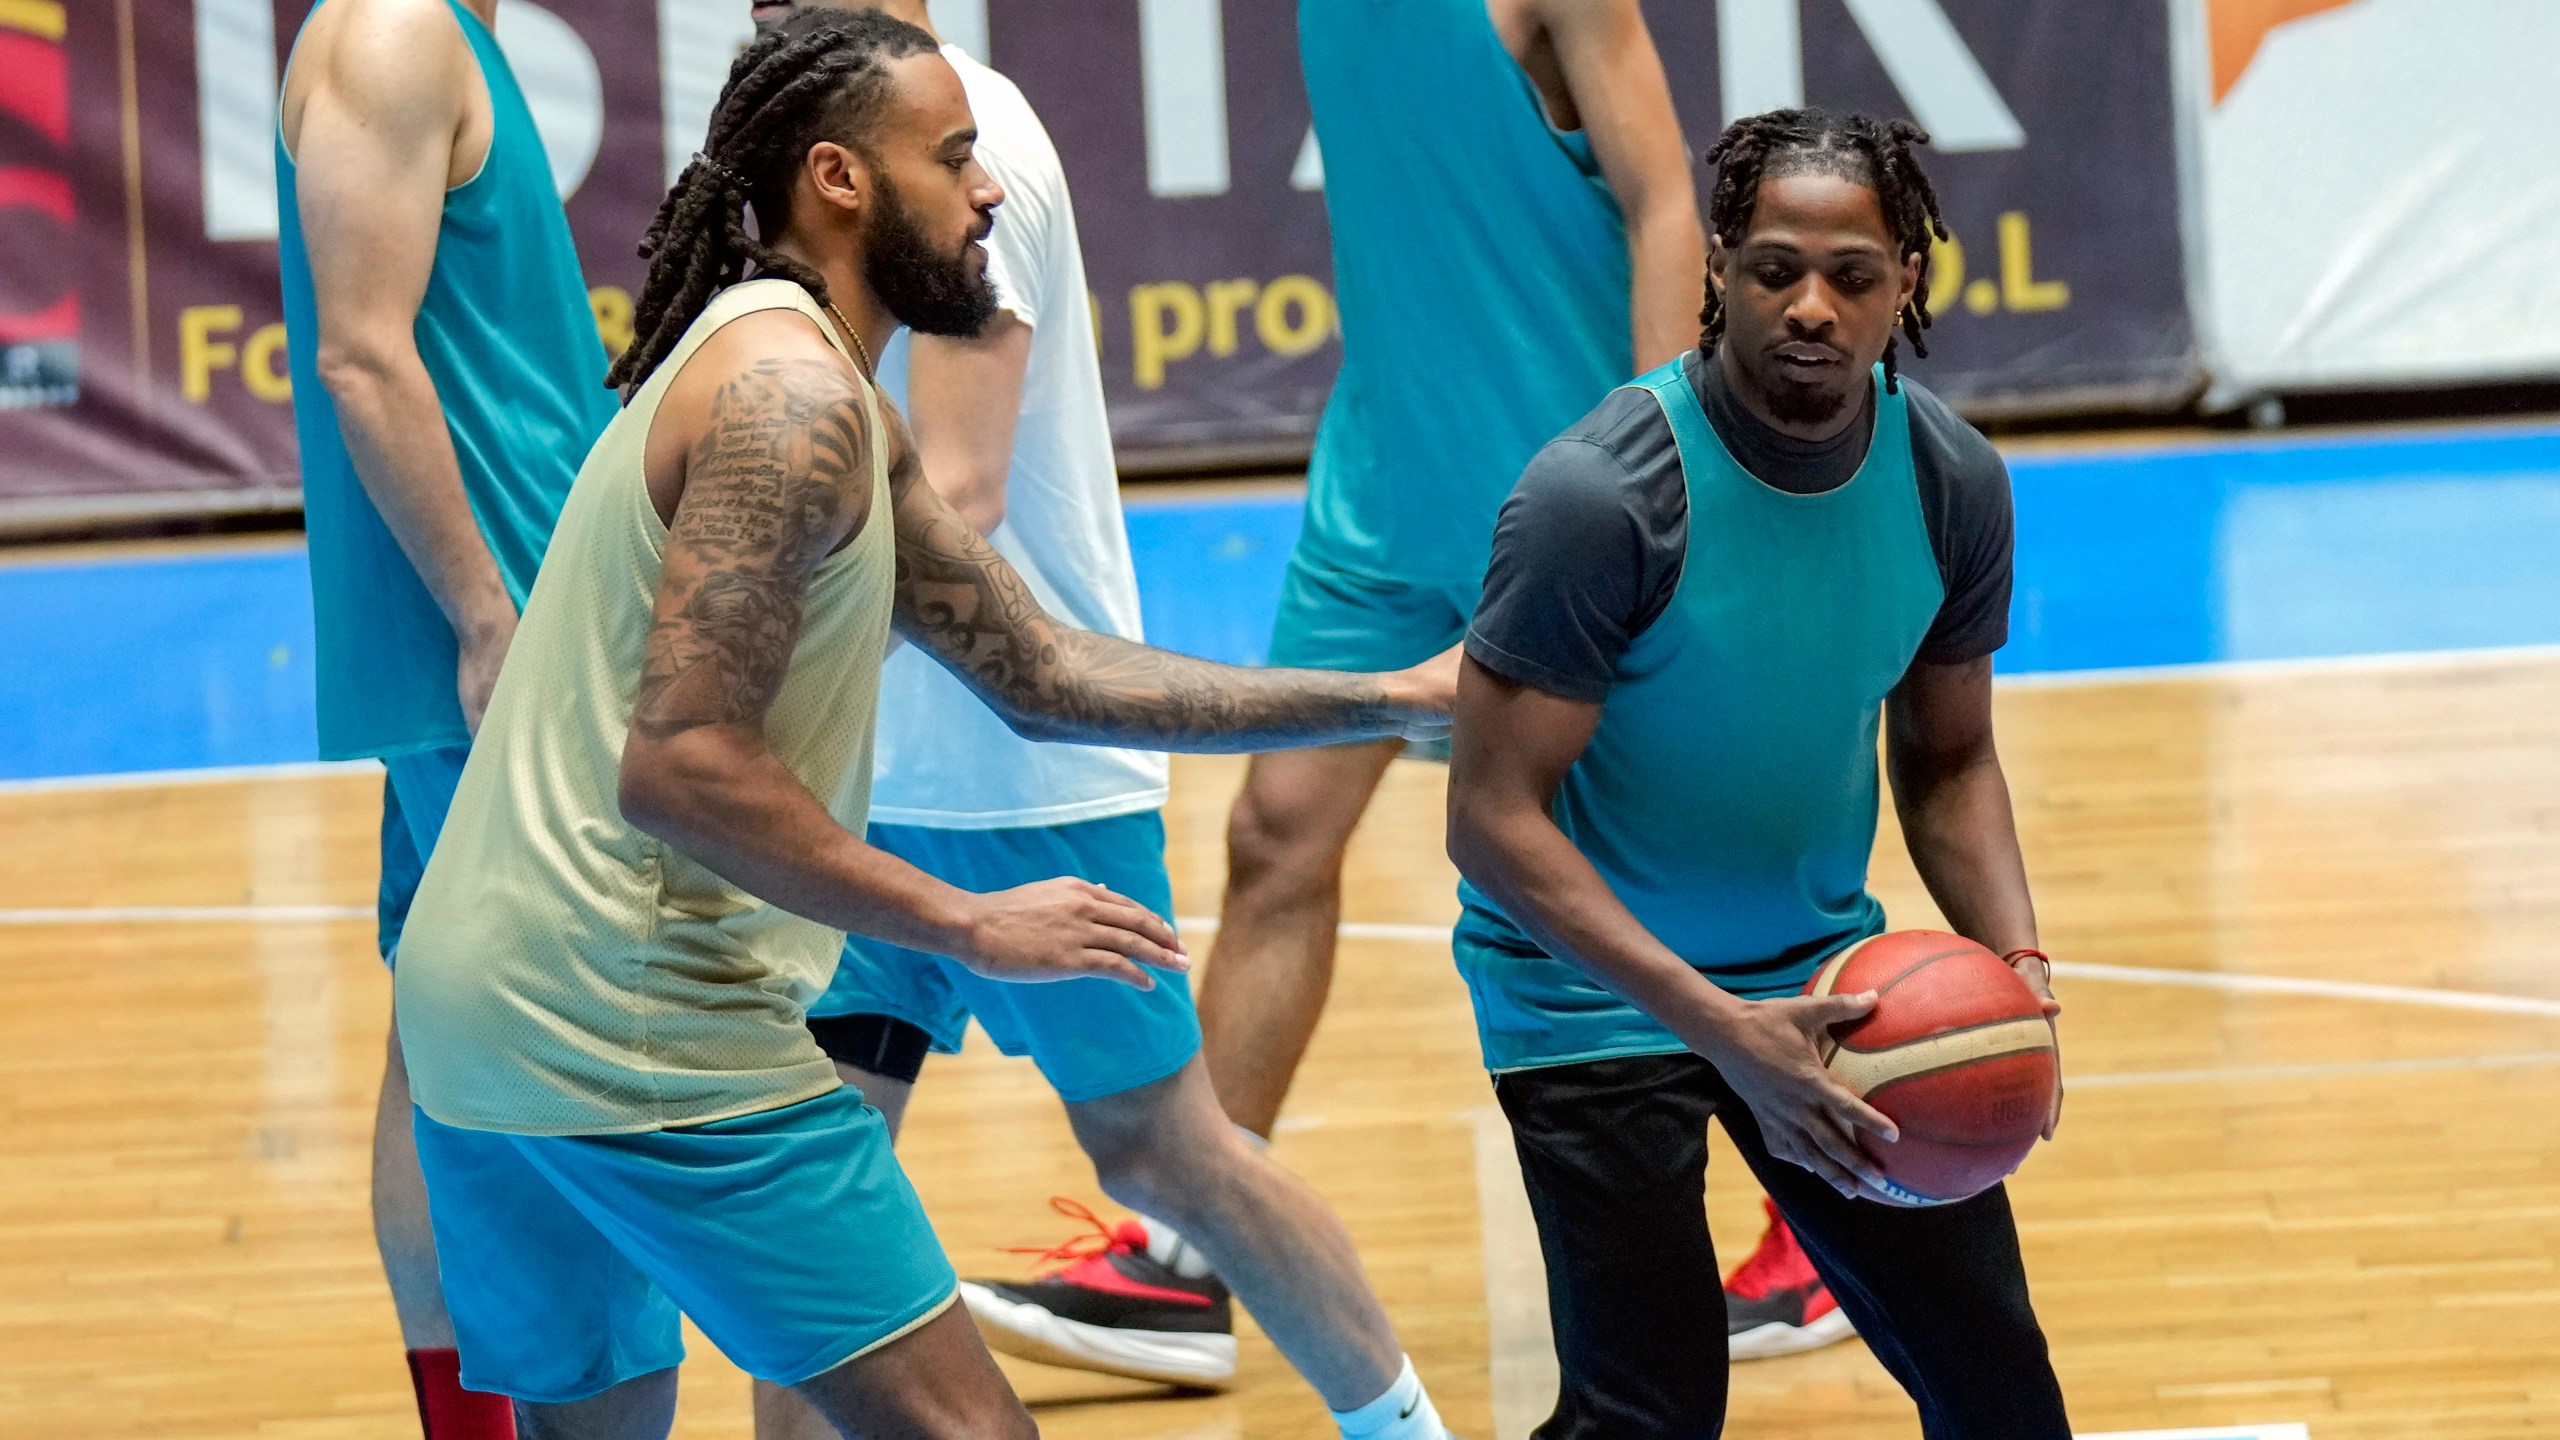 Isaac Banks, left, and, Uchenna Iroegbu American basketball players. with the Hashed al-Shaabi - the Popular Mobilization Forces - in the Iraqi Basketball Super League, take part in a team practice in Baghdad, Iraq, Thursday, March 21, 2024. U.S. players are in high demand on Iraqi basketball teams, even those whose owners have a tense relationship with Washington. (AP Photo/Hadi Mizban)